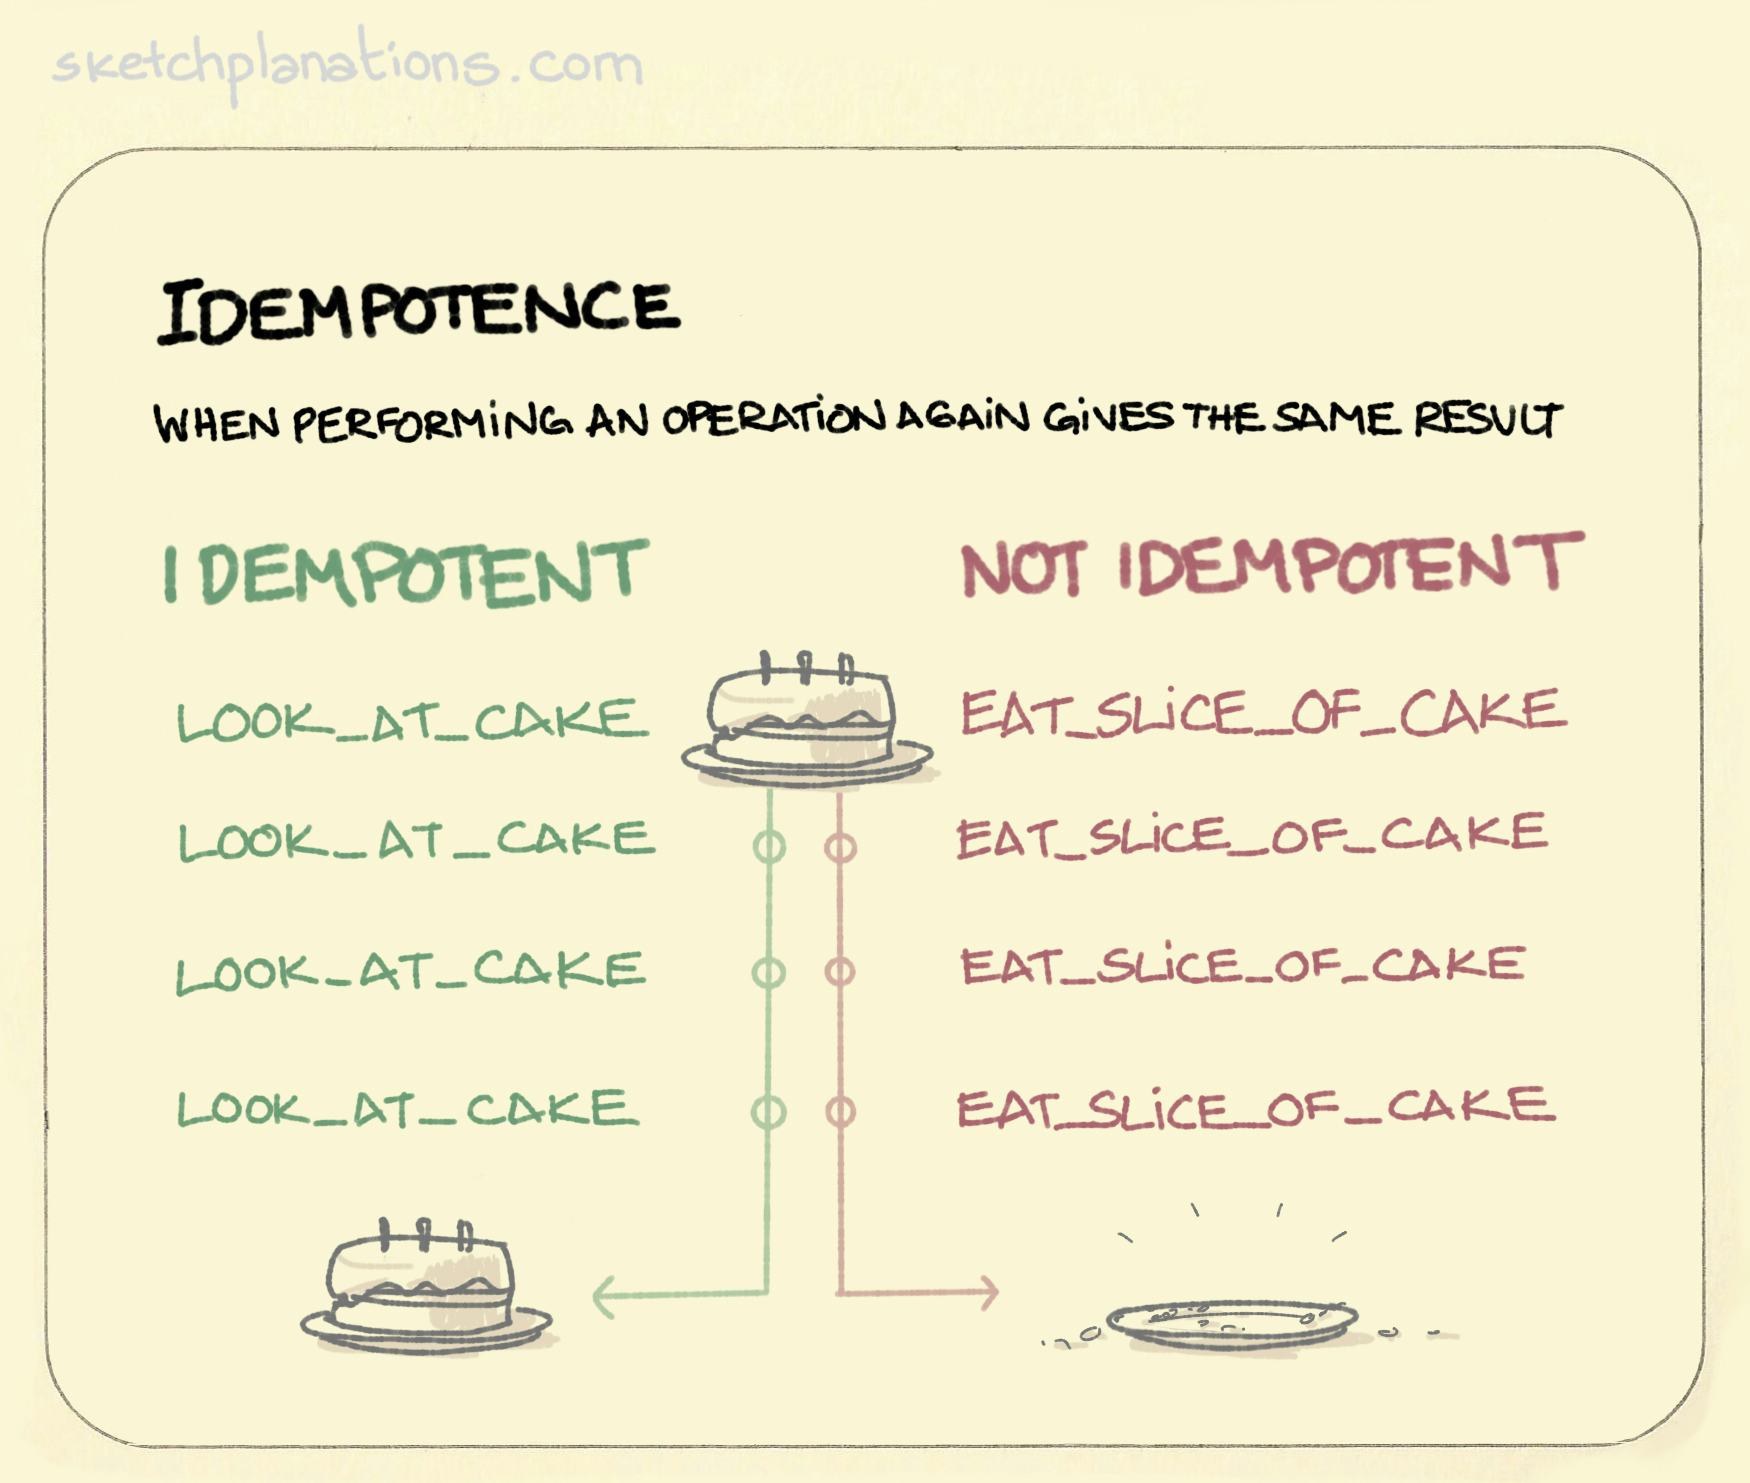 Idempotence, or idempotent, illustrated with an idempotent action of look_at_cake that always has the same effect, compared with a non-idempotent action of eat_slice_of_cake